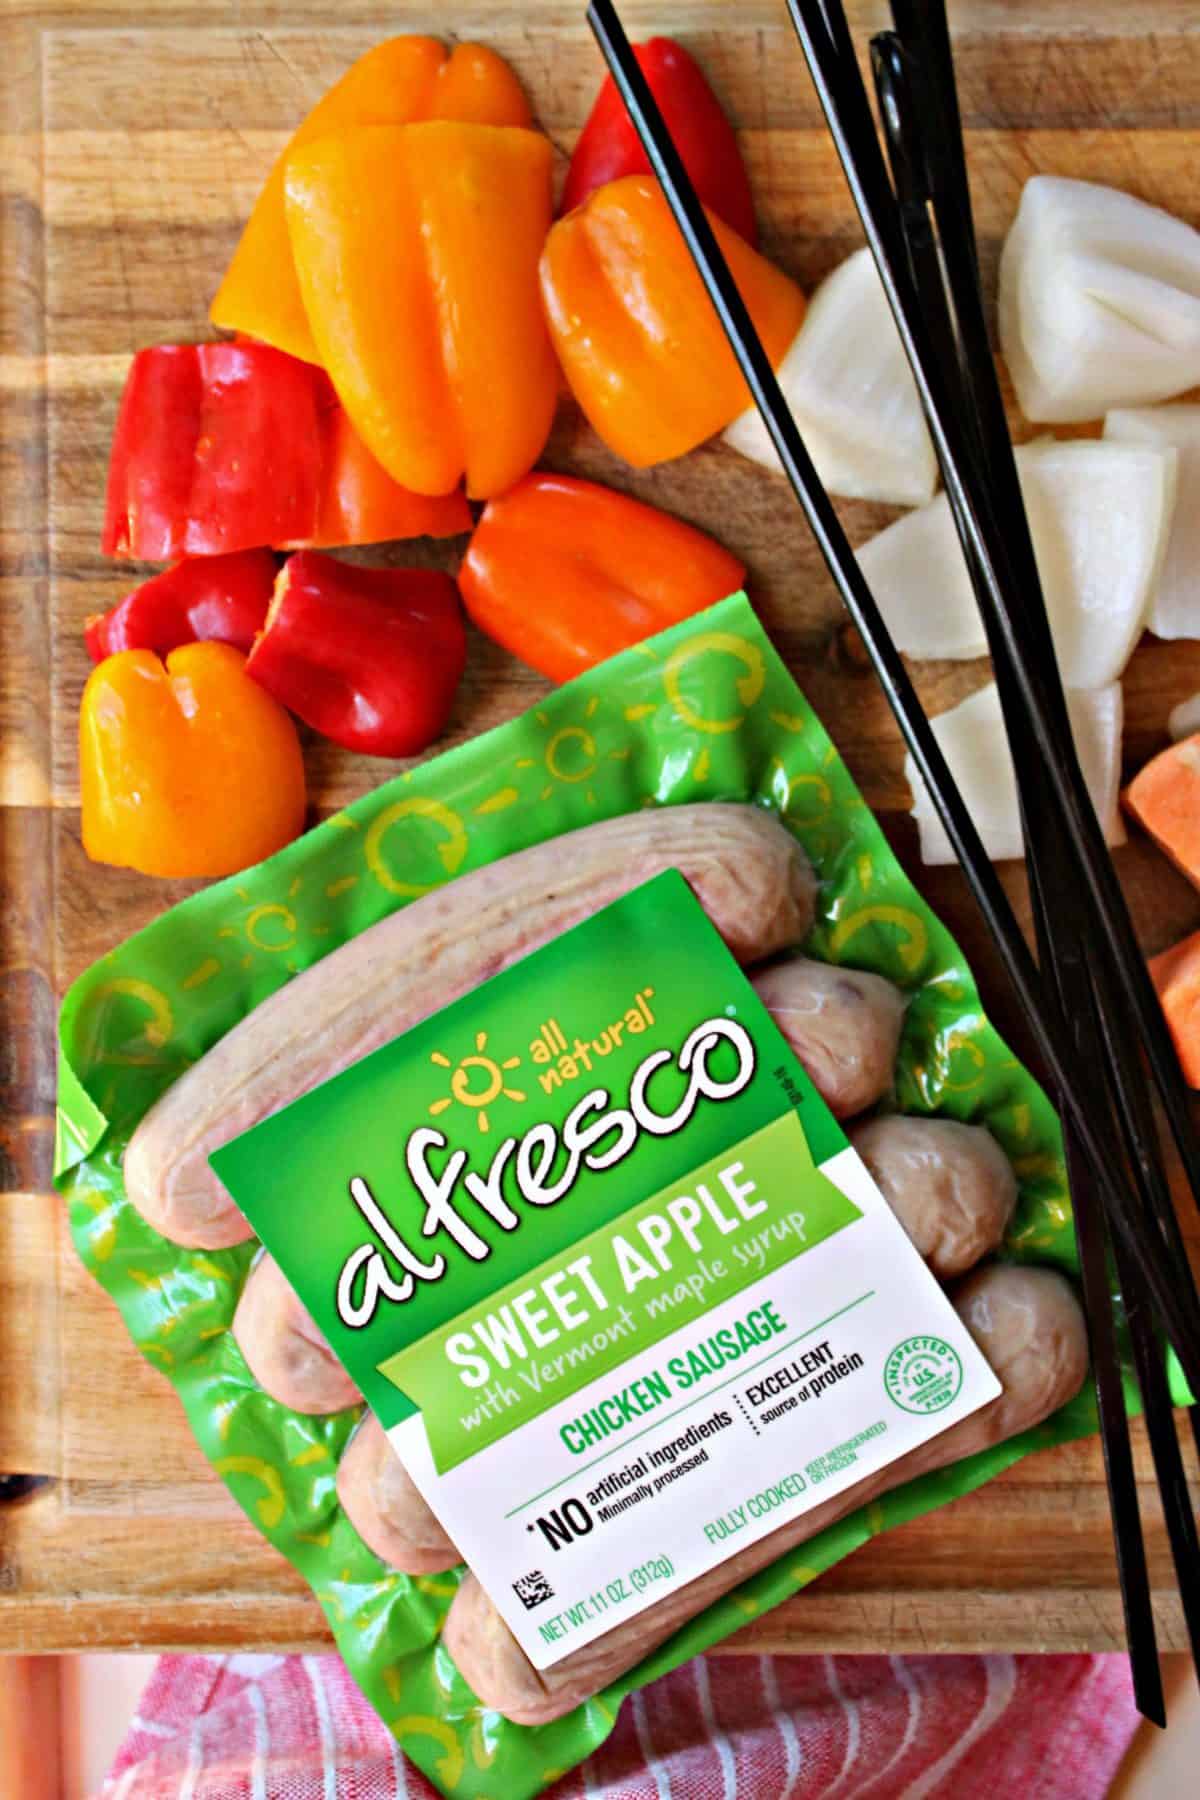 Close up of al fresco chicken sausage packaging with cut up vegetables and kabob skewers.